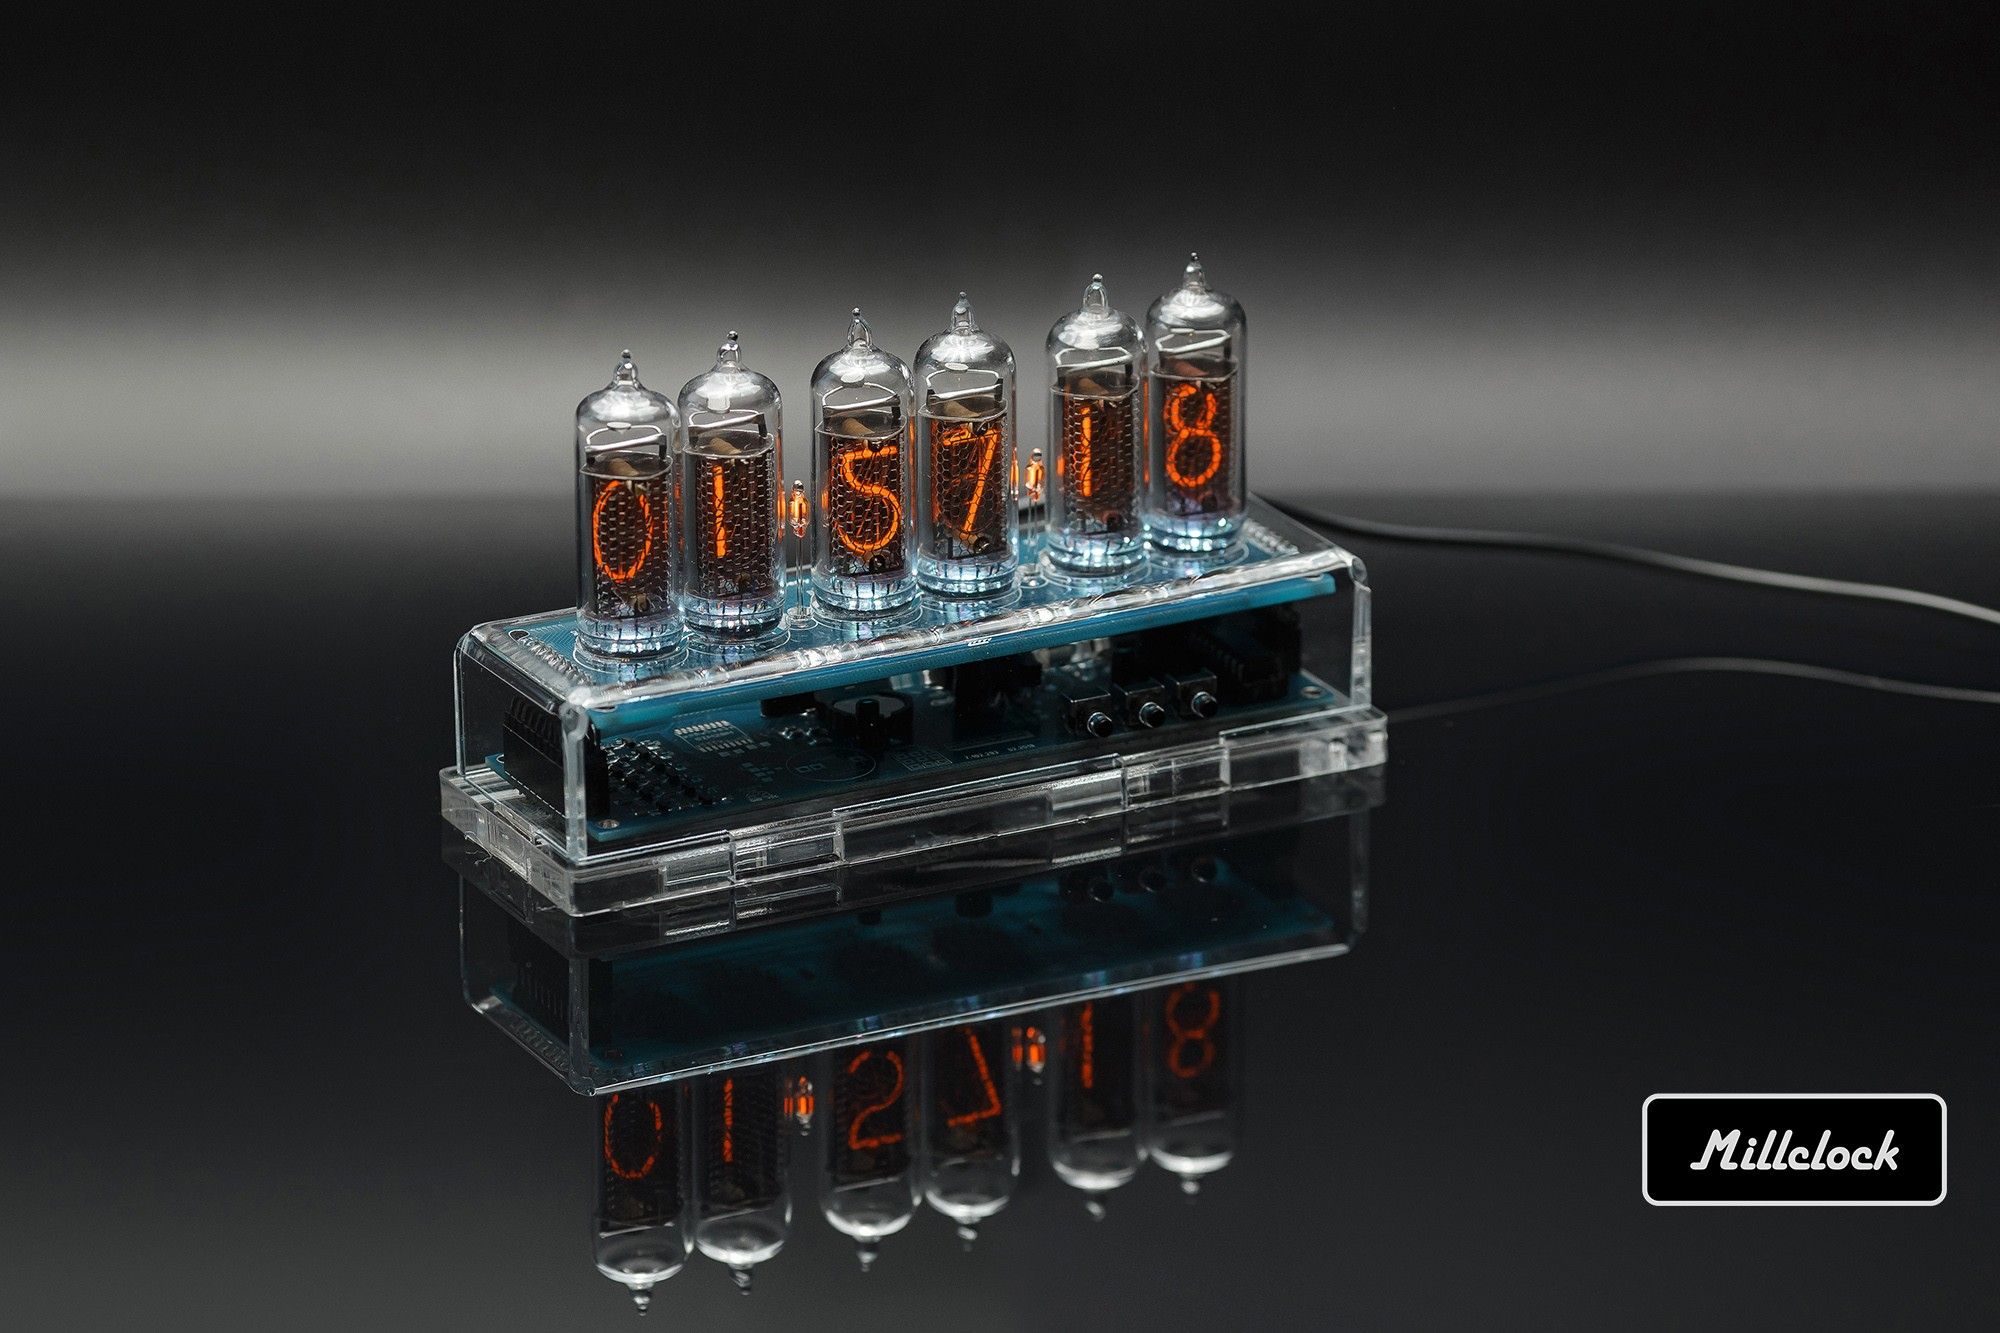 IN-14 NIXIE TUBE CLOCK ASSEMBLED ACRYLIC ENCLOSURE  ADAPTER 6-tubes by MILLCLOCK 